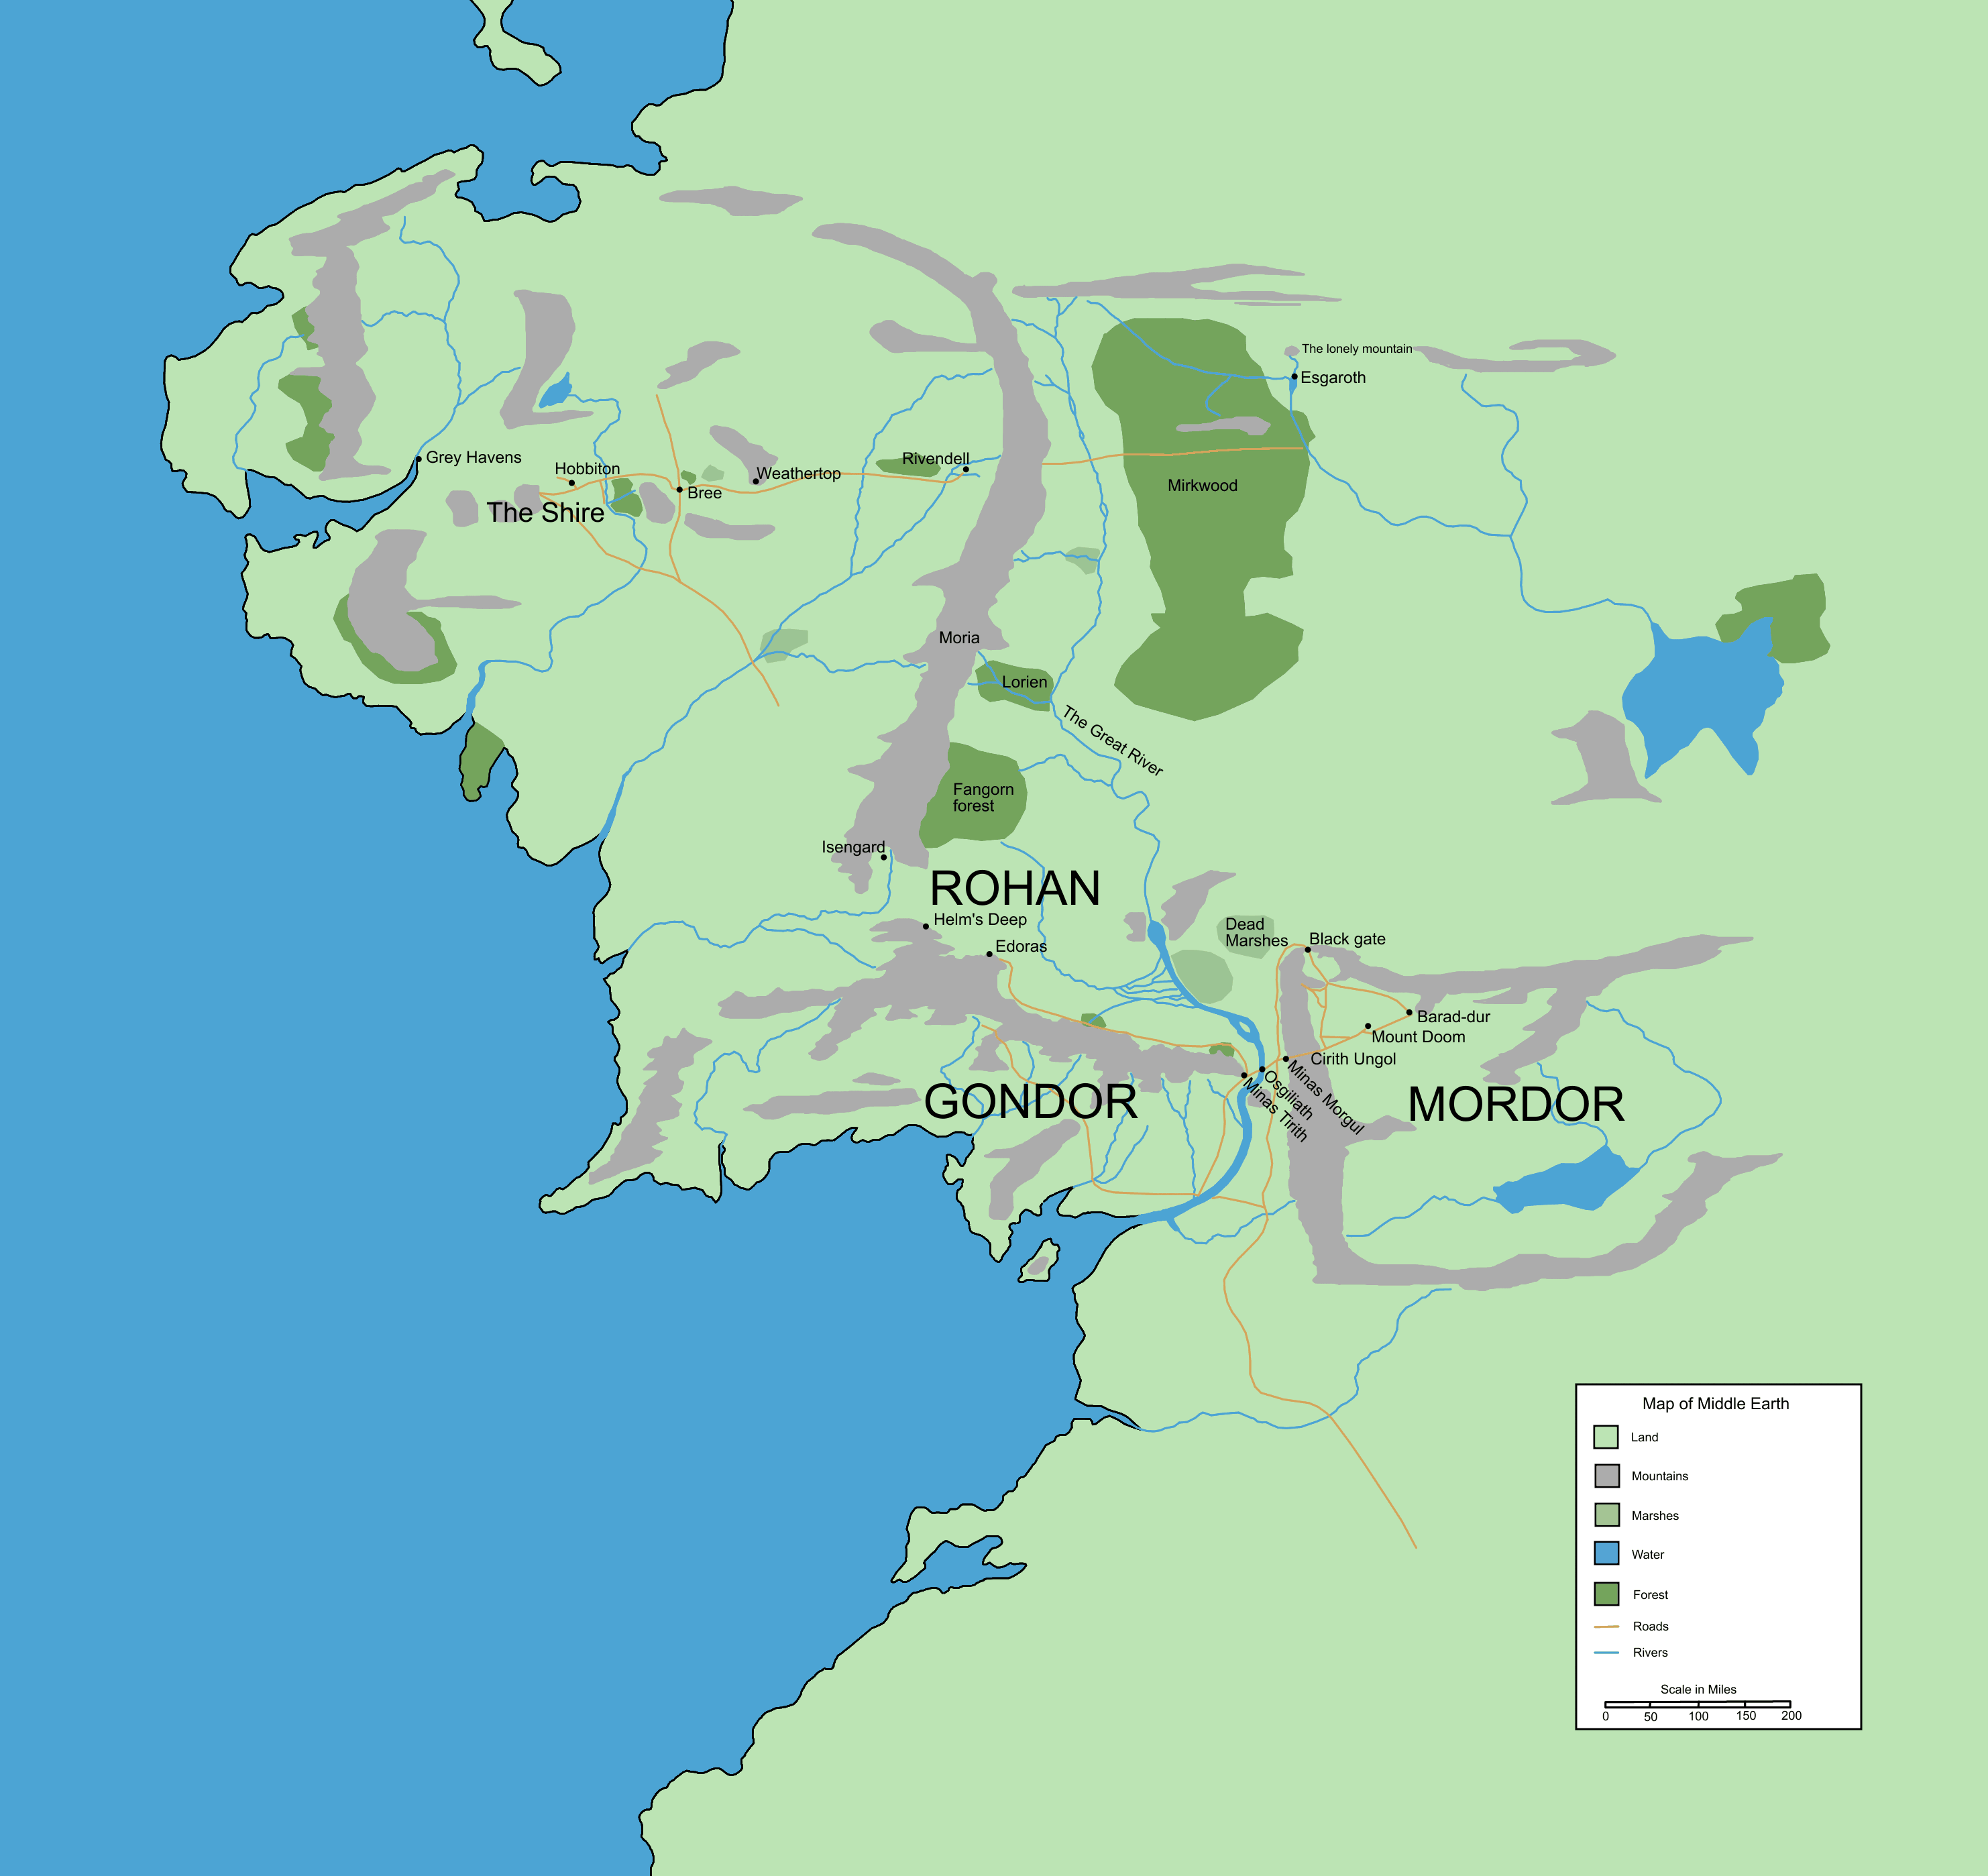 Narrative structure of The Lord of the Rings - Wikipedia